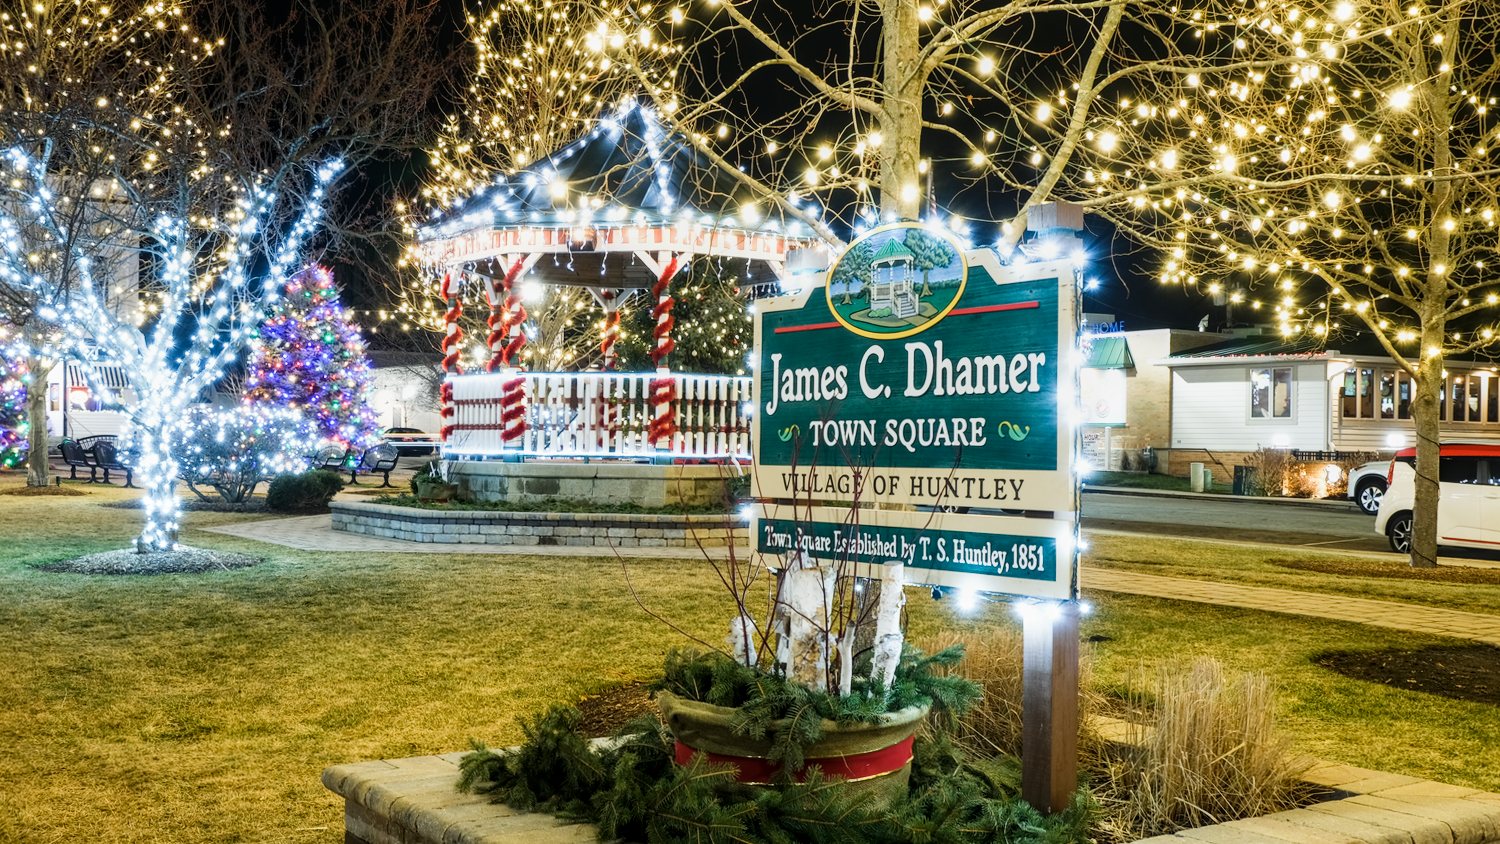 James C. Dhamer Town Square sign at the Huntley Town Square.